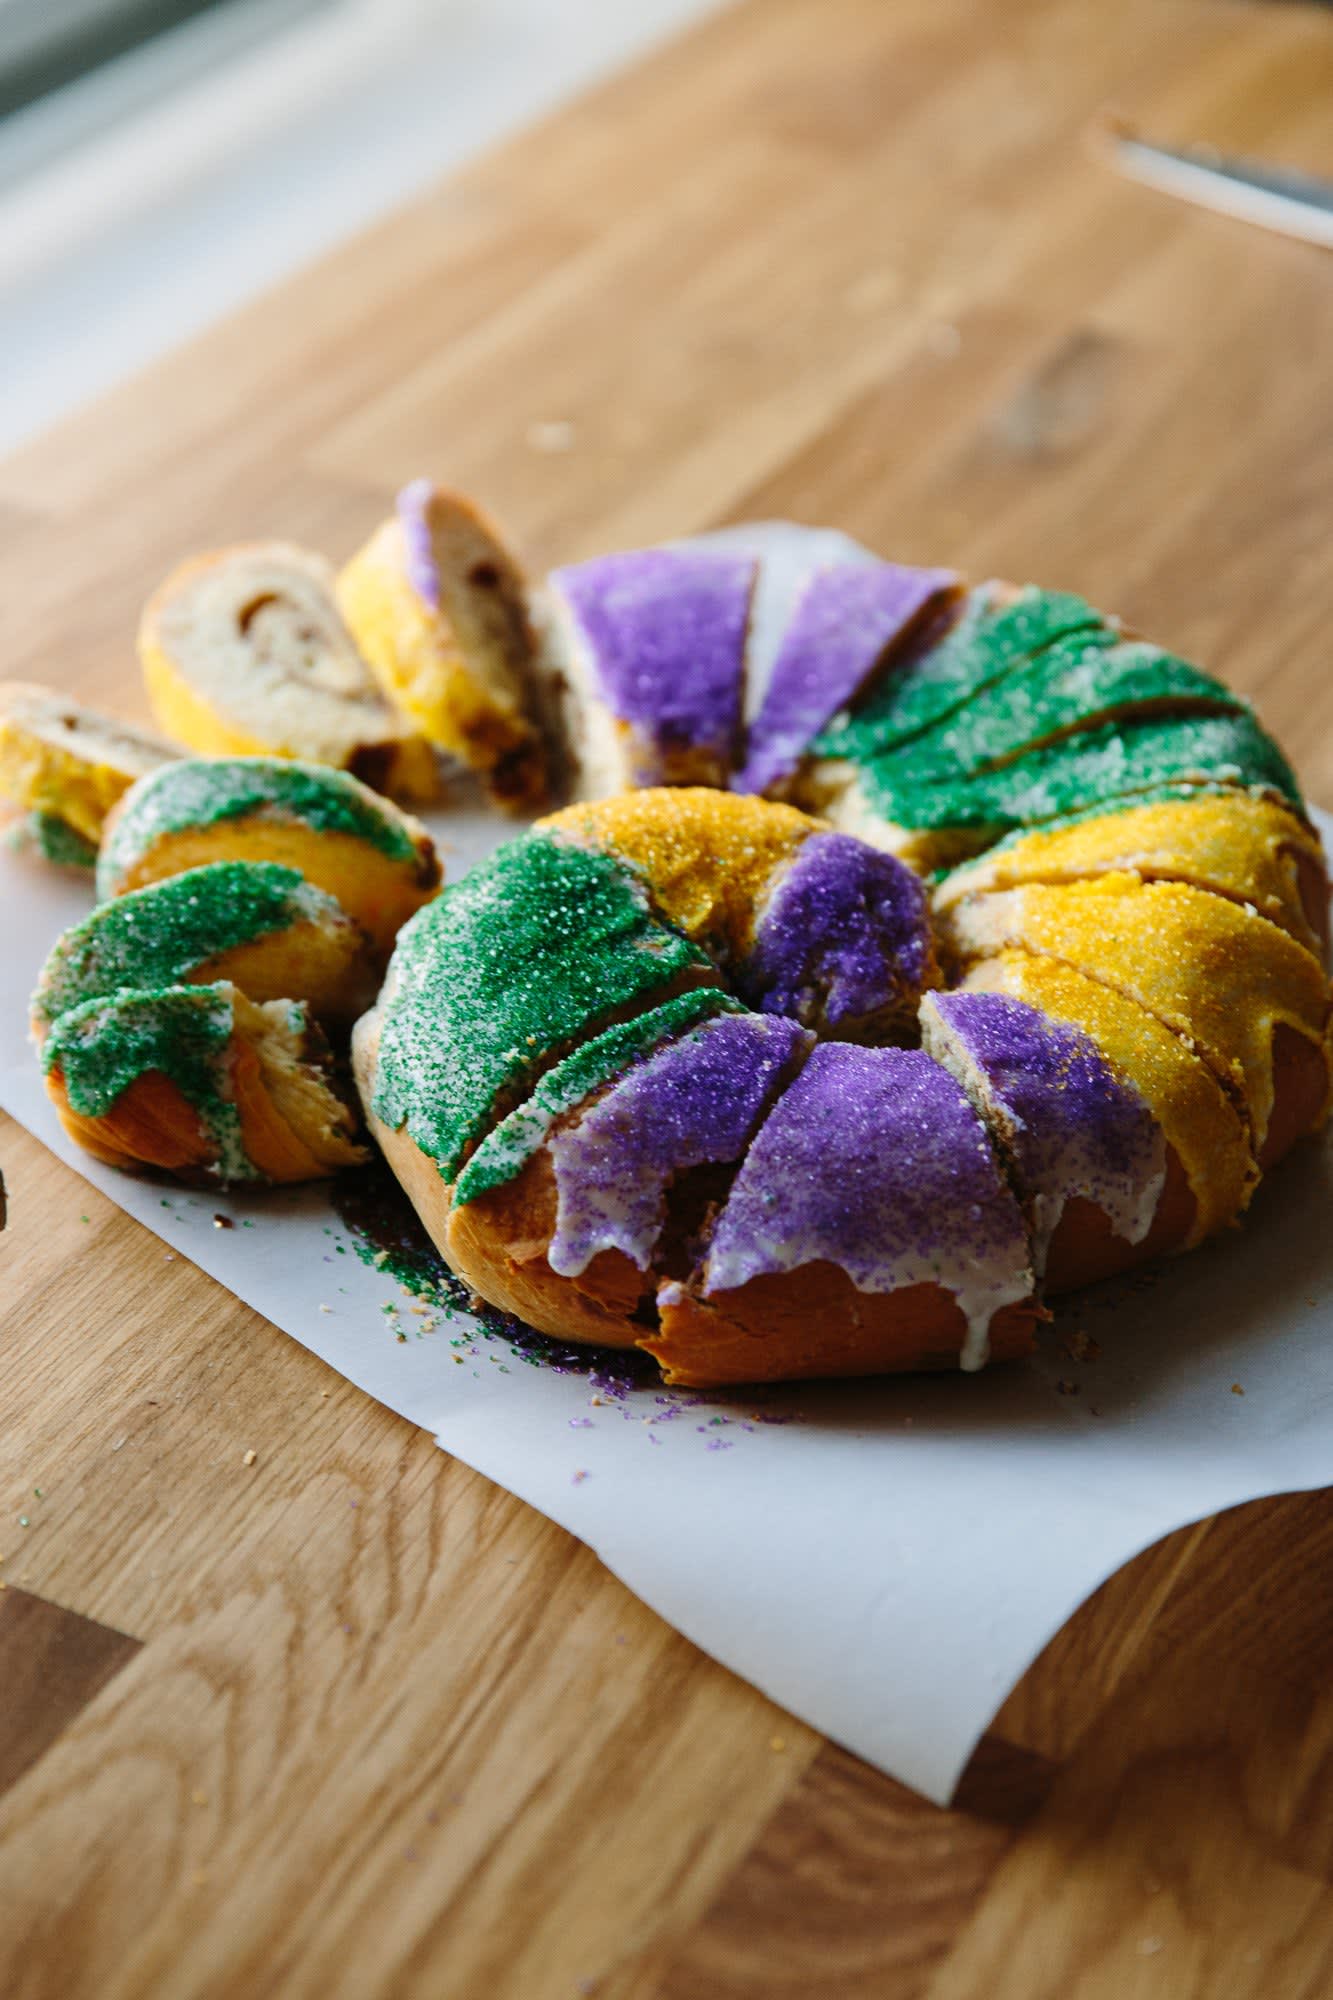 How To Make a King Cake for Mardi Gras | Kitchn